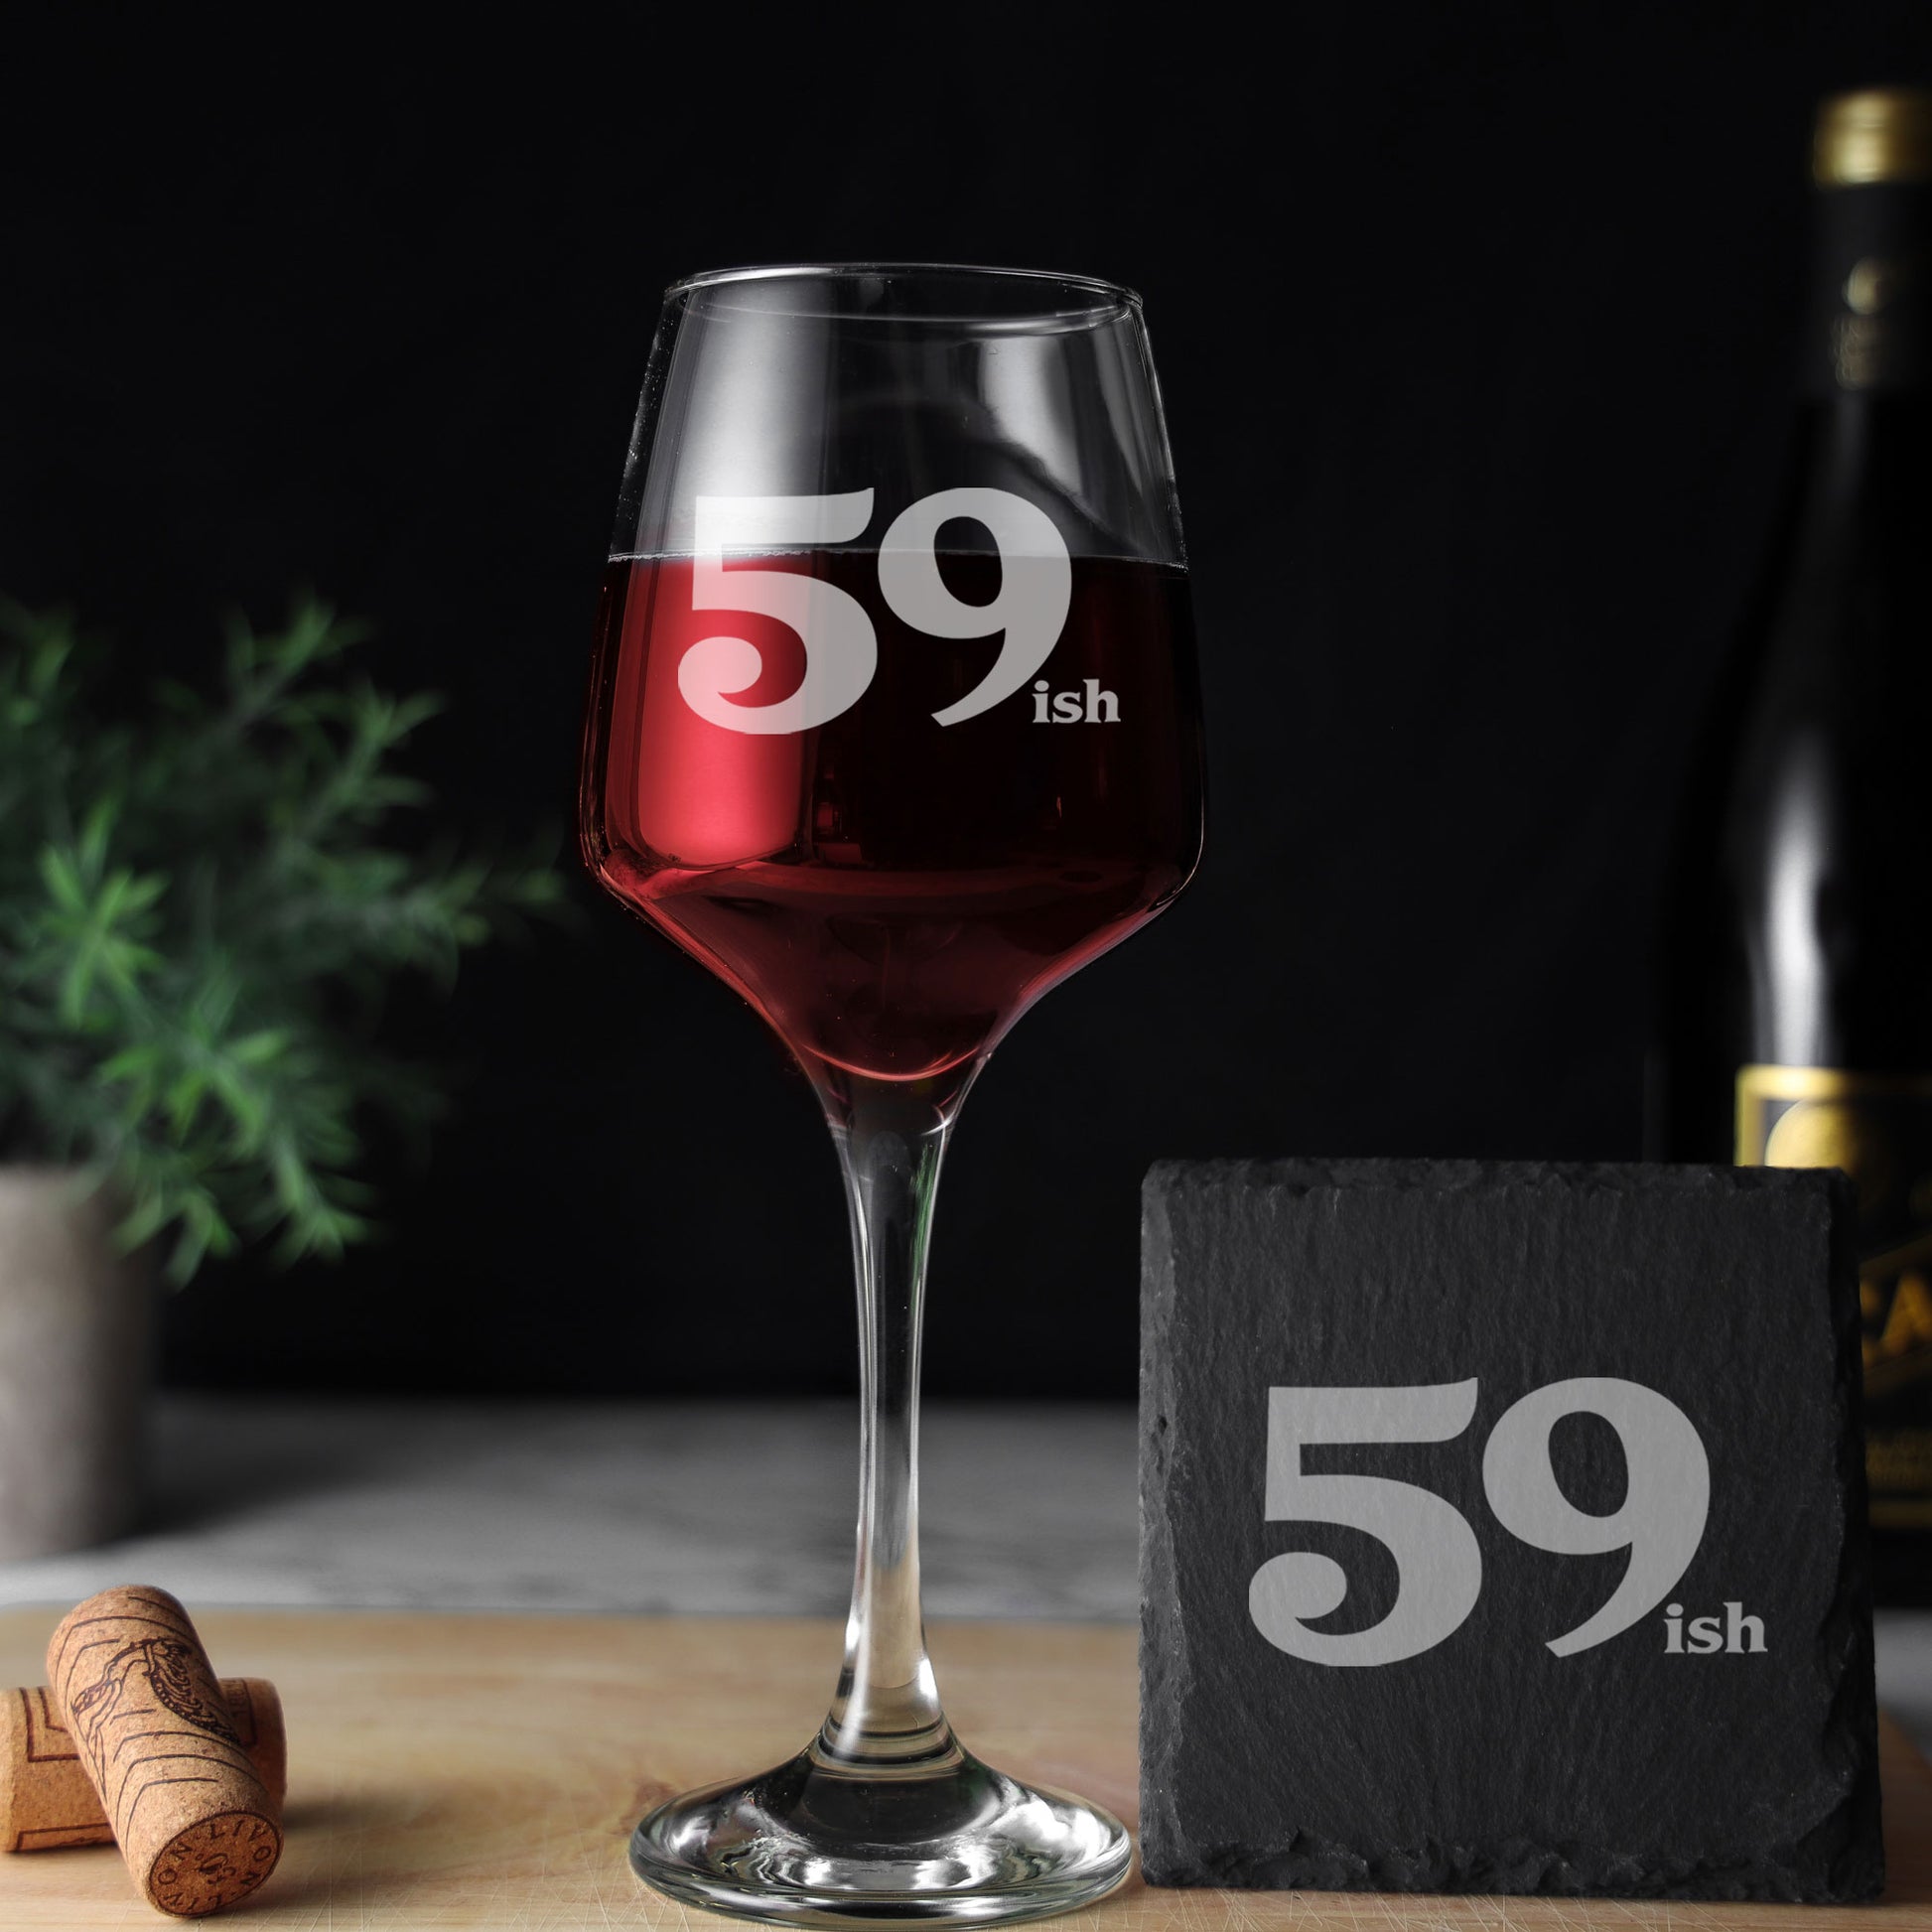 59ish Wine Glass and/or Coaster Set  - Always Looking Good - Glass & Square Coaster Set  